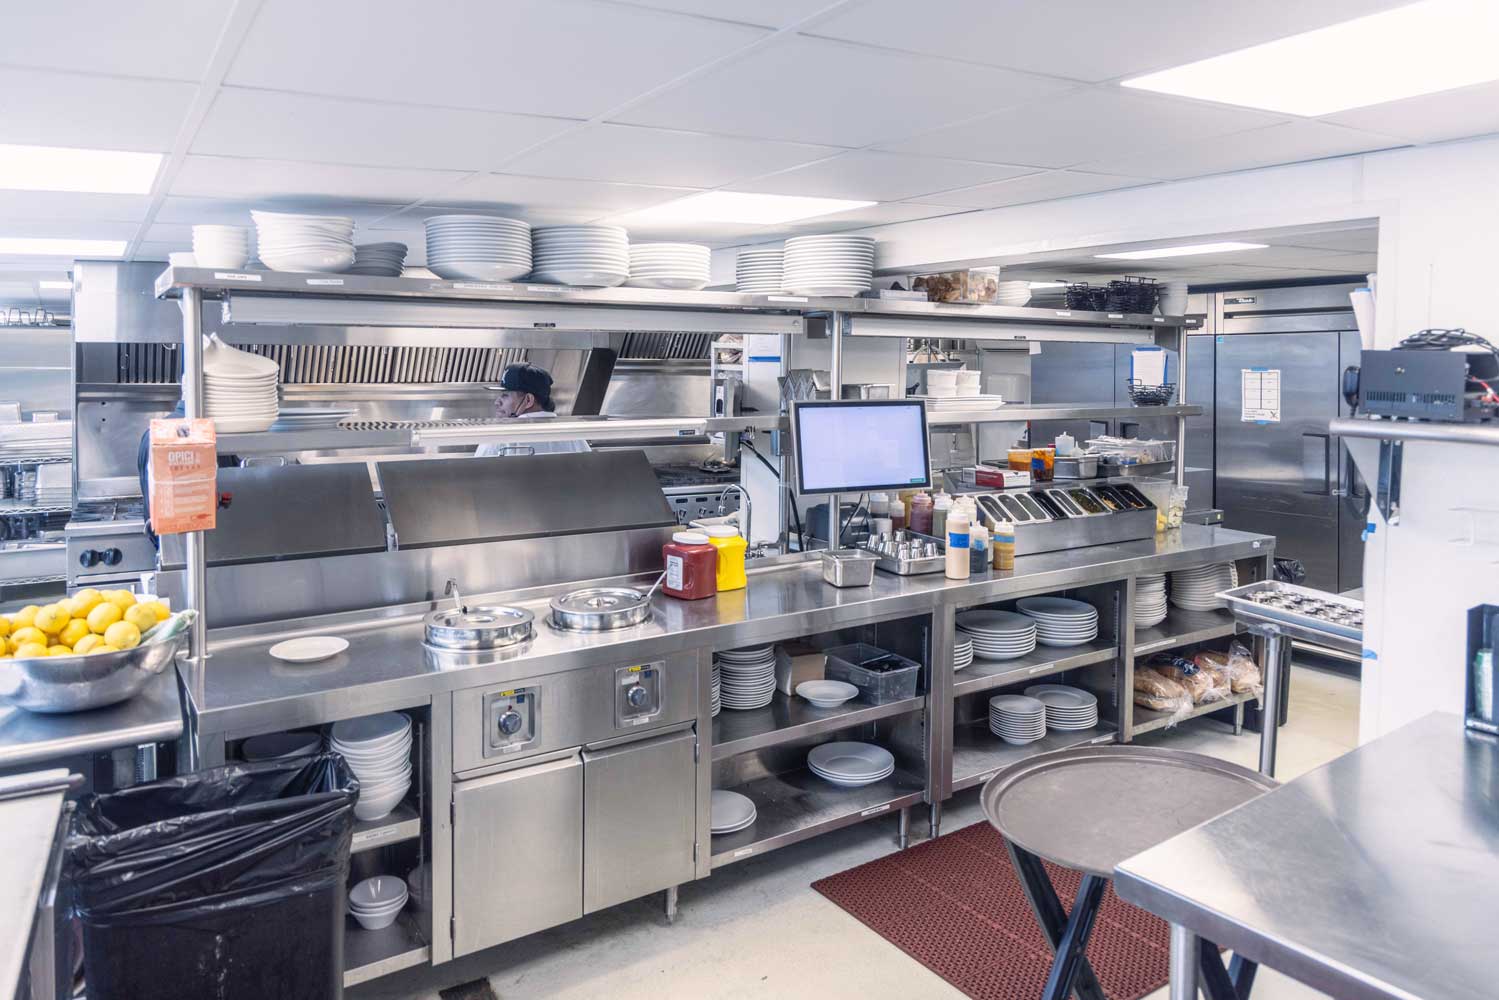 How to Plan Your Commercial Prep Kitchen Layout - IMG 0698 - Eleven36 Blog